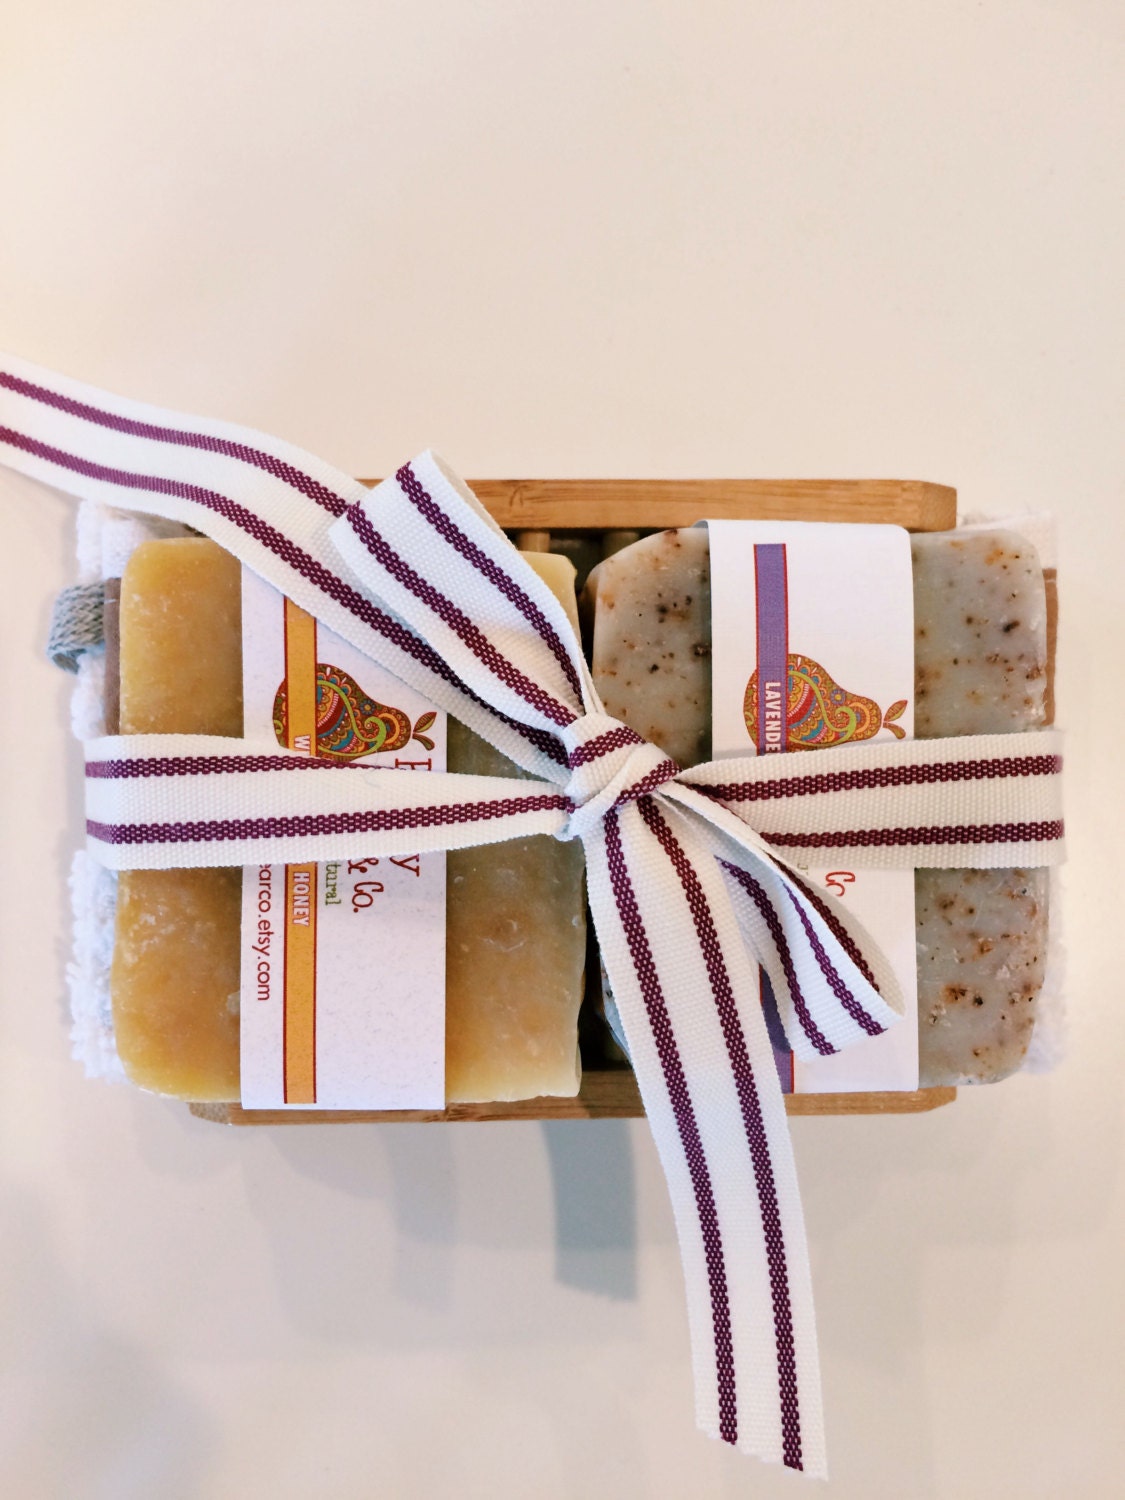 Handmade Soap Gift Set/ gift ideas for him or by paisleypearco